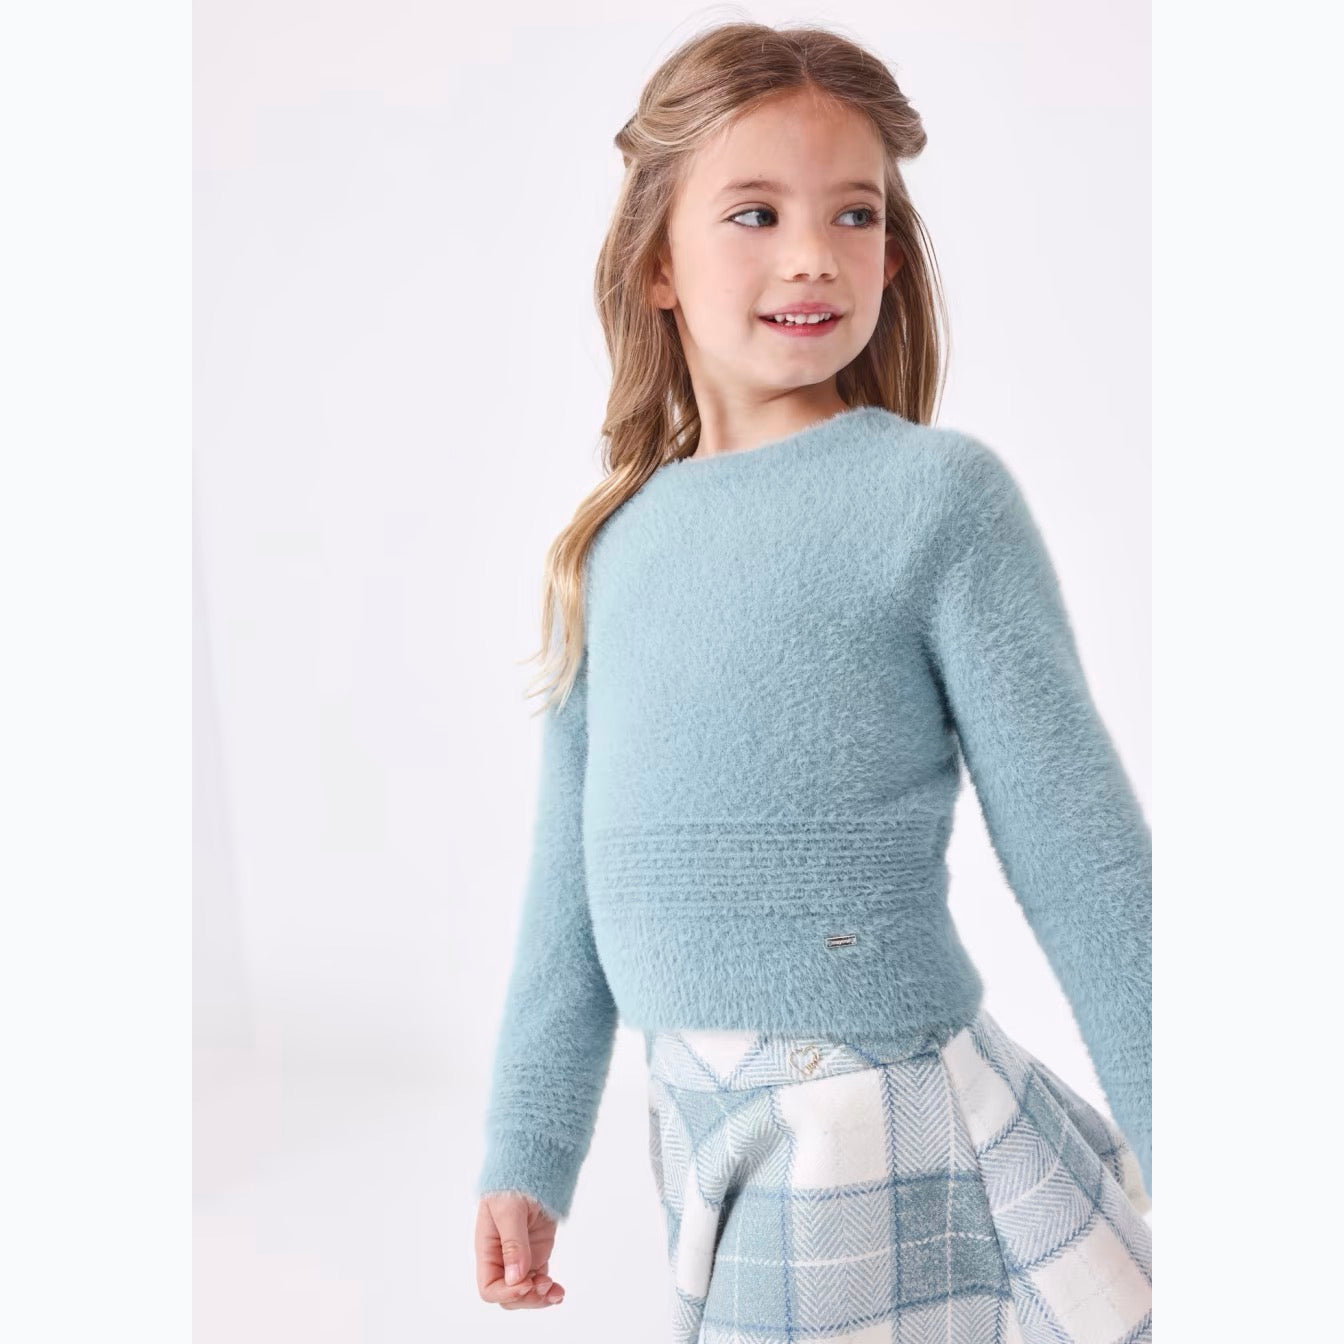 Mayoral Girls Sweater 4305 Bluebell Clothing 4YRS / Blue,5YRS / Blue,6YRS / Blue,7YRS / Blue,8YRS / Blue,9YRS / Blue